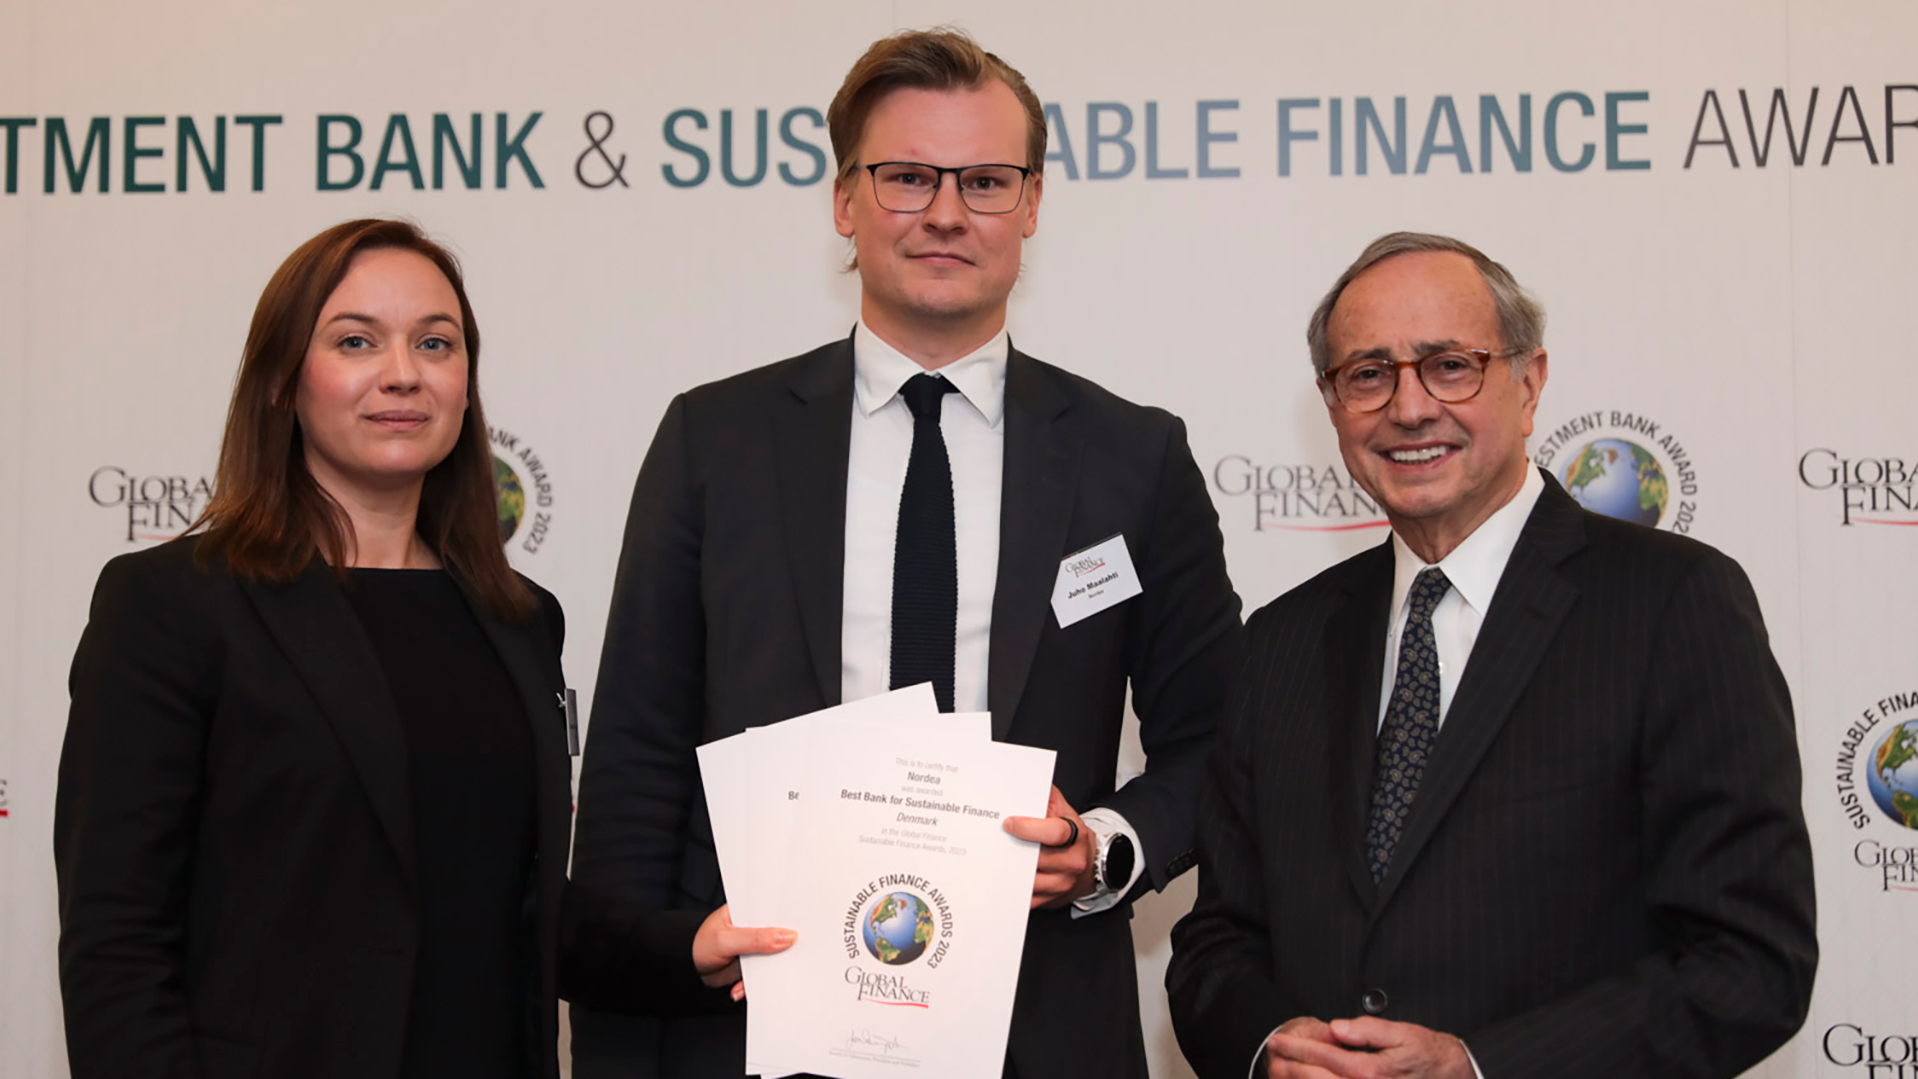 Photo from the Global Finance Sustainable Finance Awards 2023 featuring Nordea's Isabella Frenning Willis and Juho Maalahti as well as Global Finance's Joseph Giarraputo